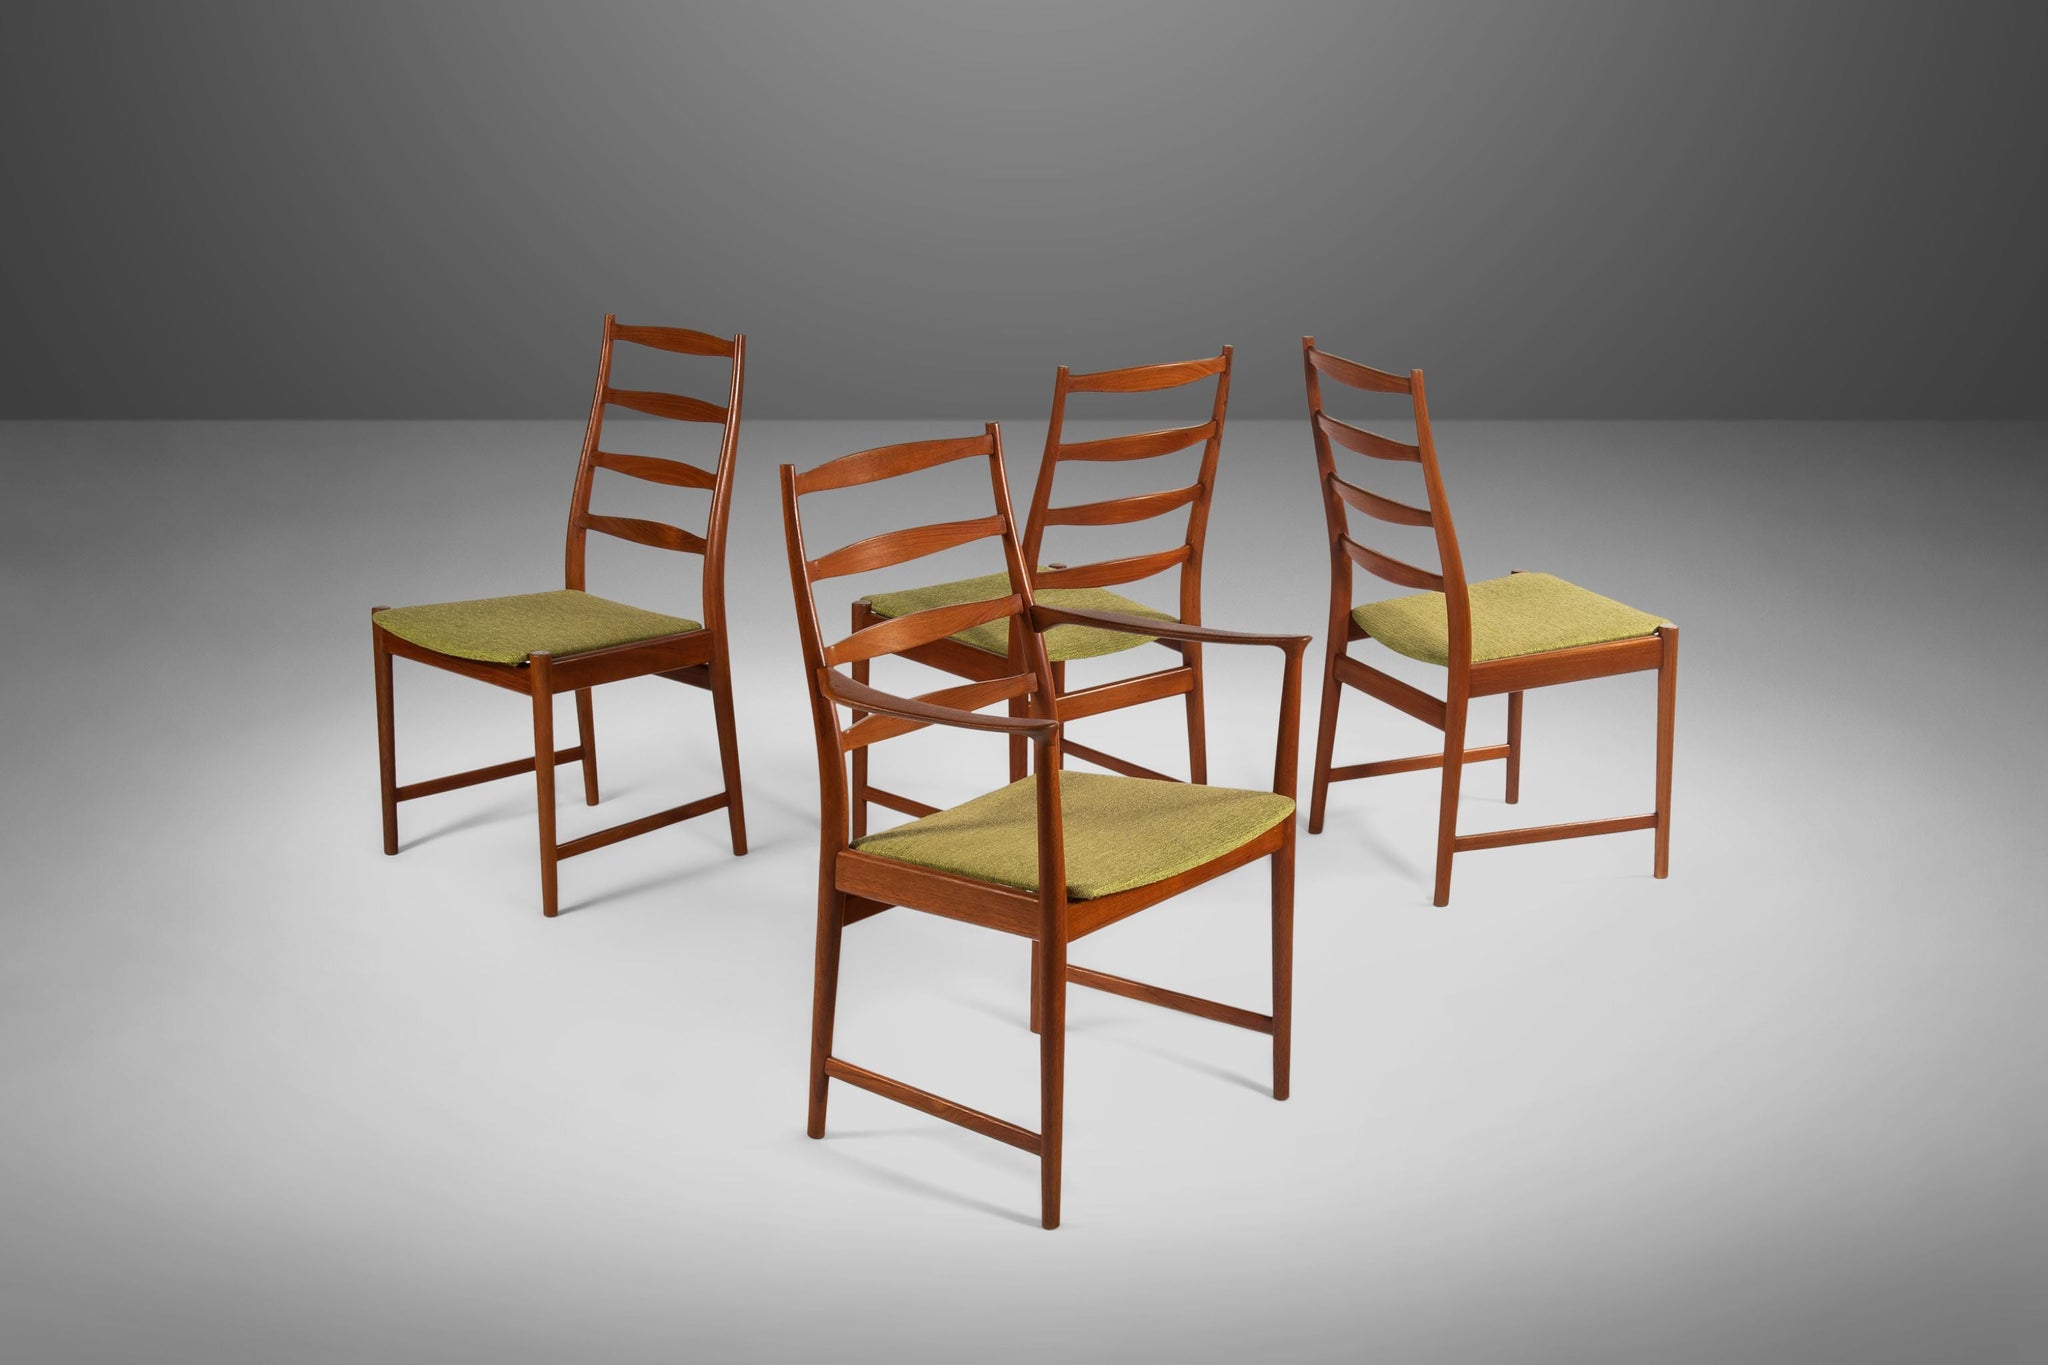 Owen Dining Chair with Ladder Back